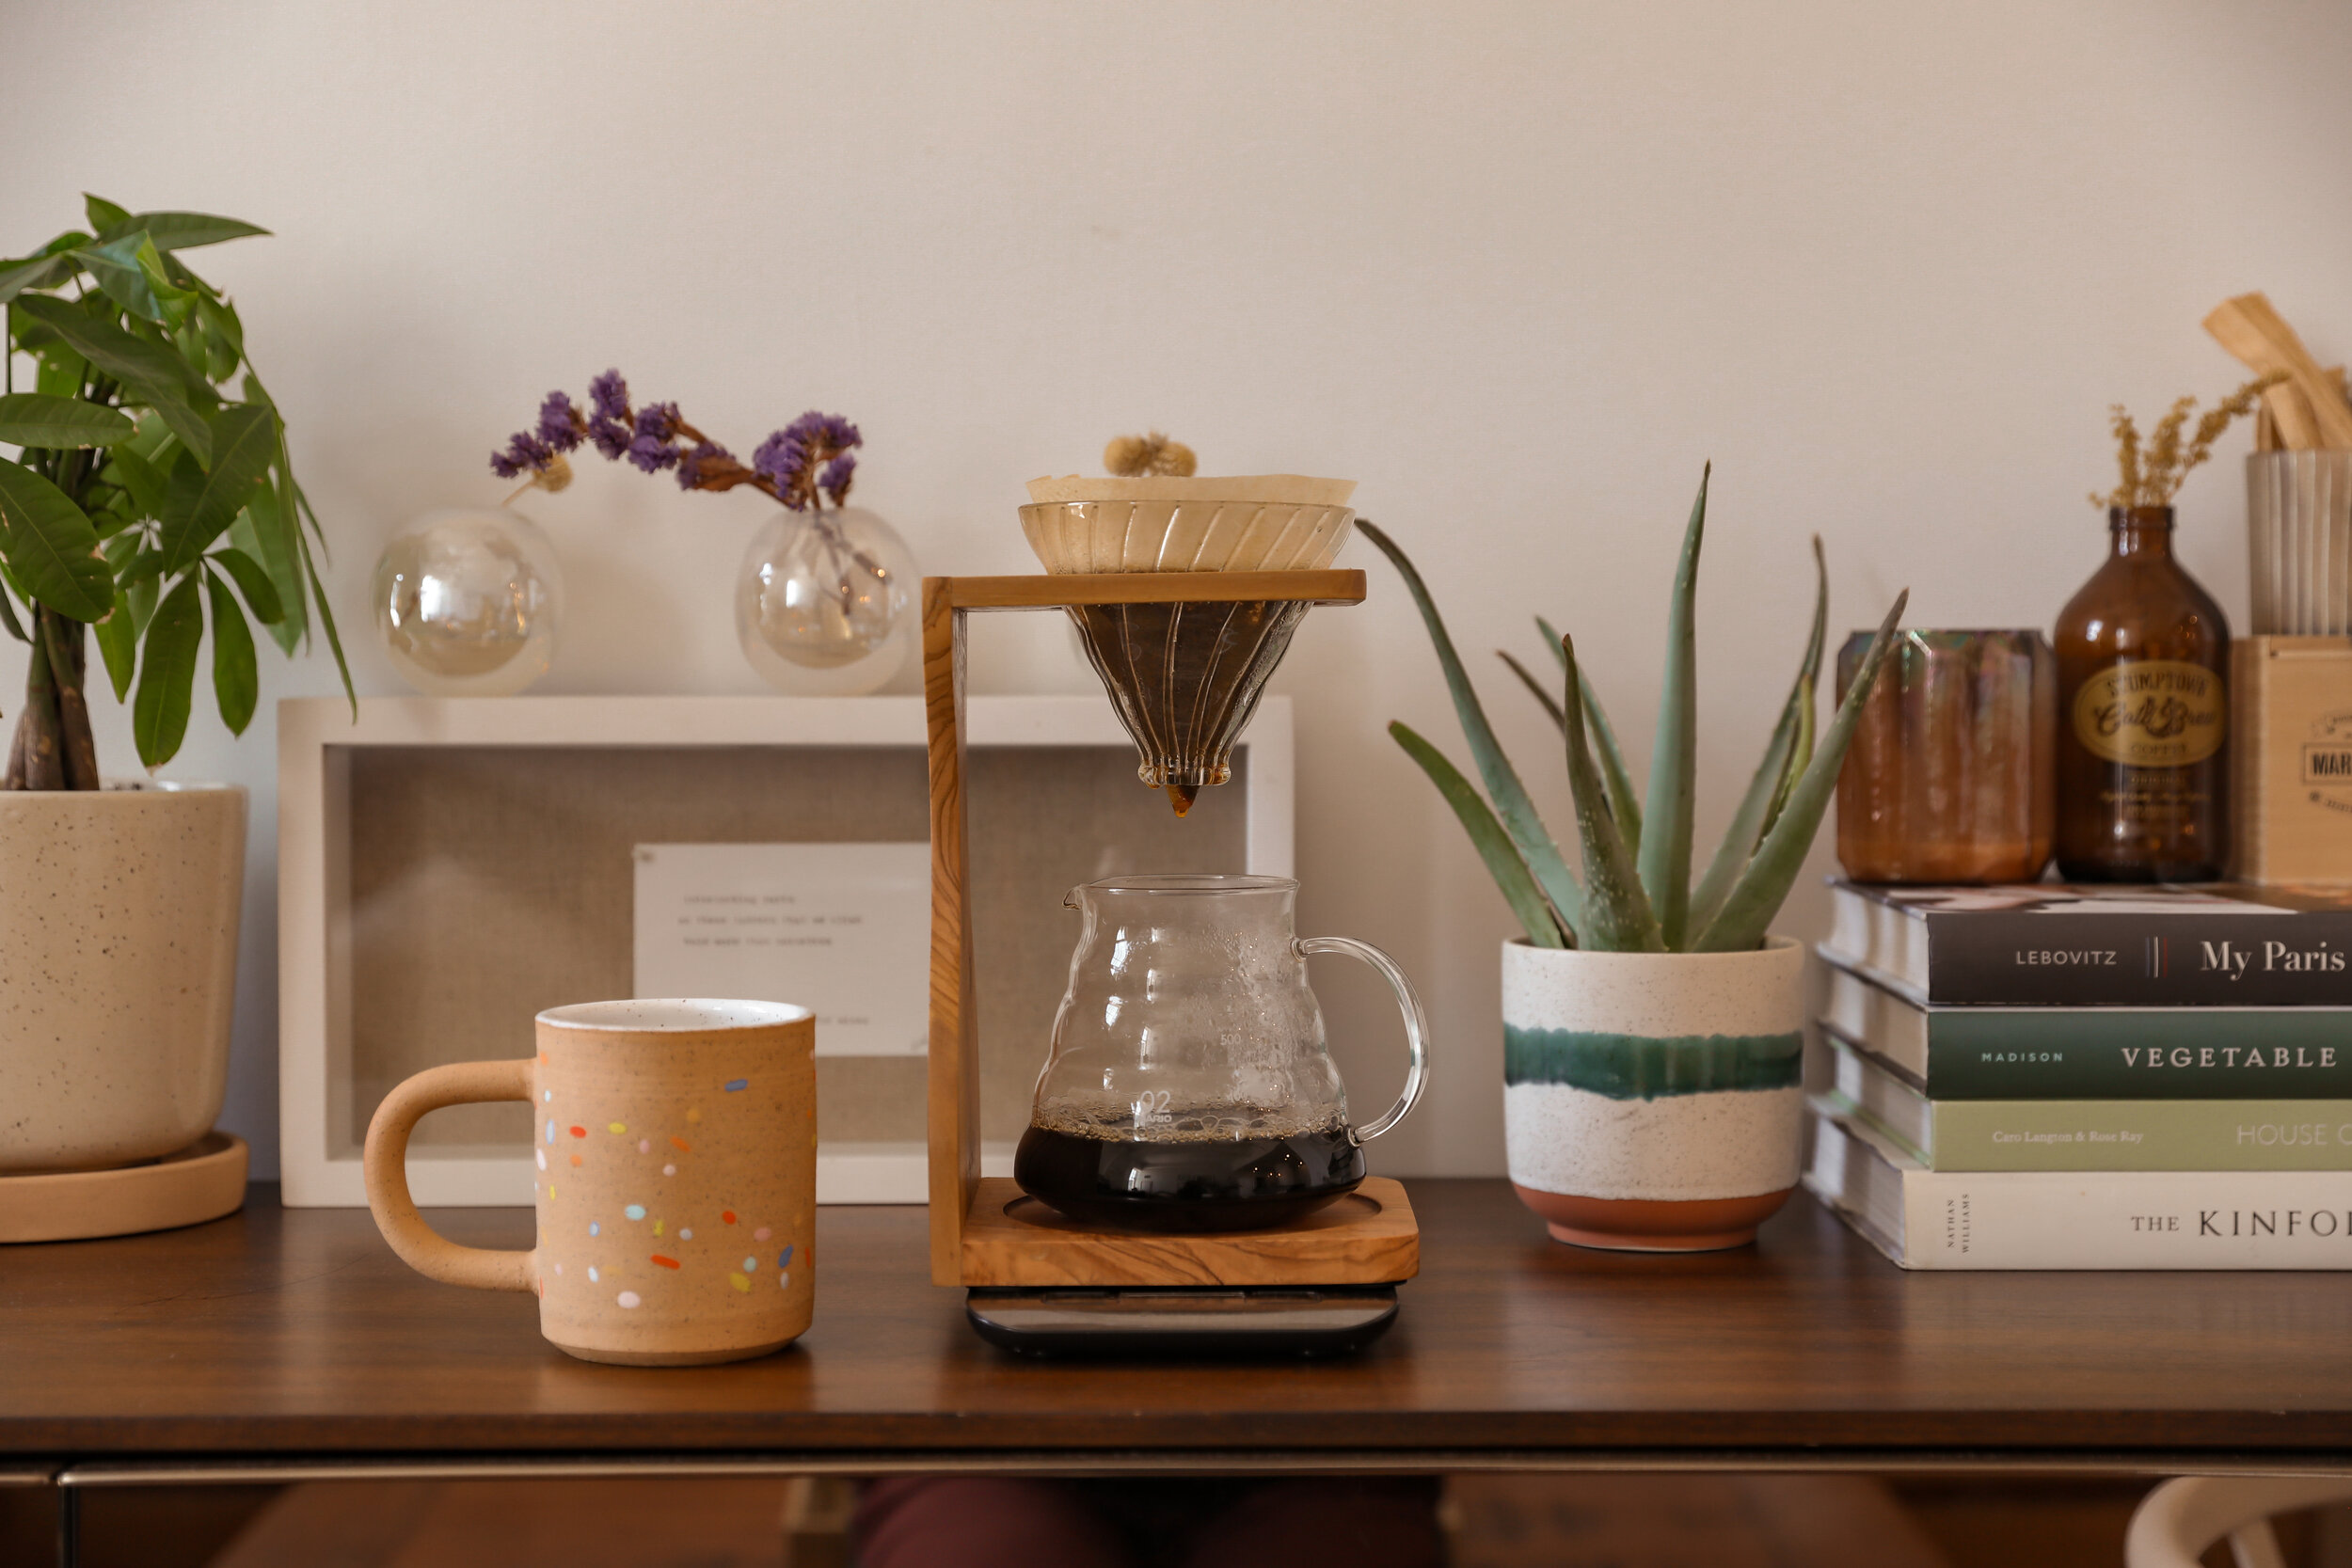 Pour-Over Coffee: How to Make the Perfect Cup